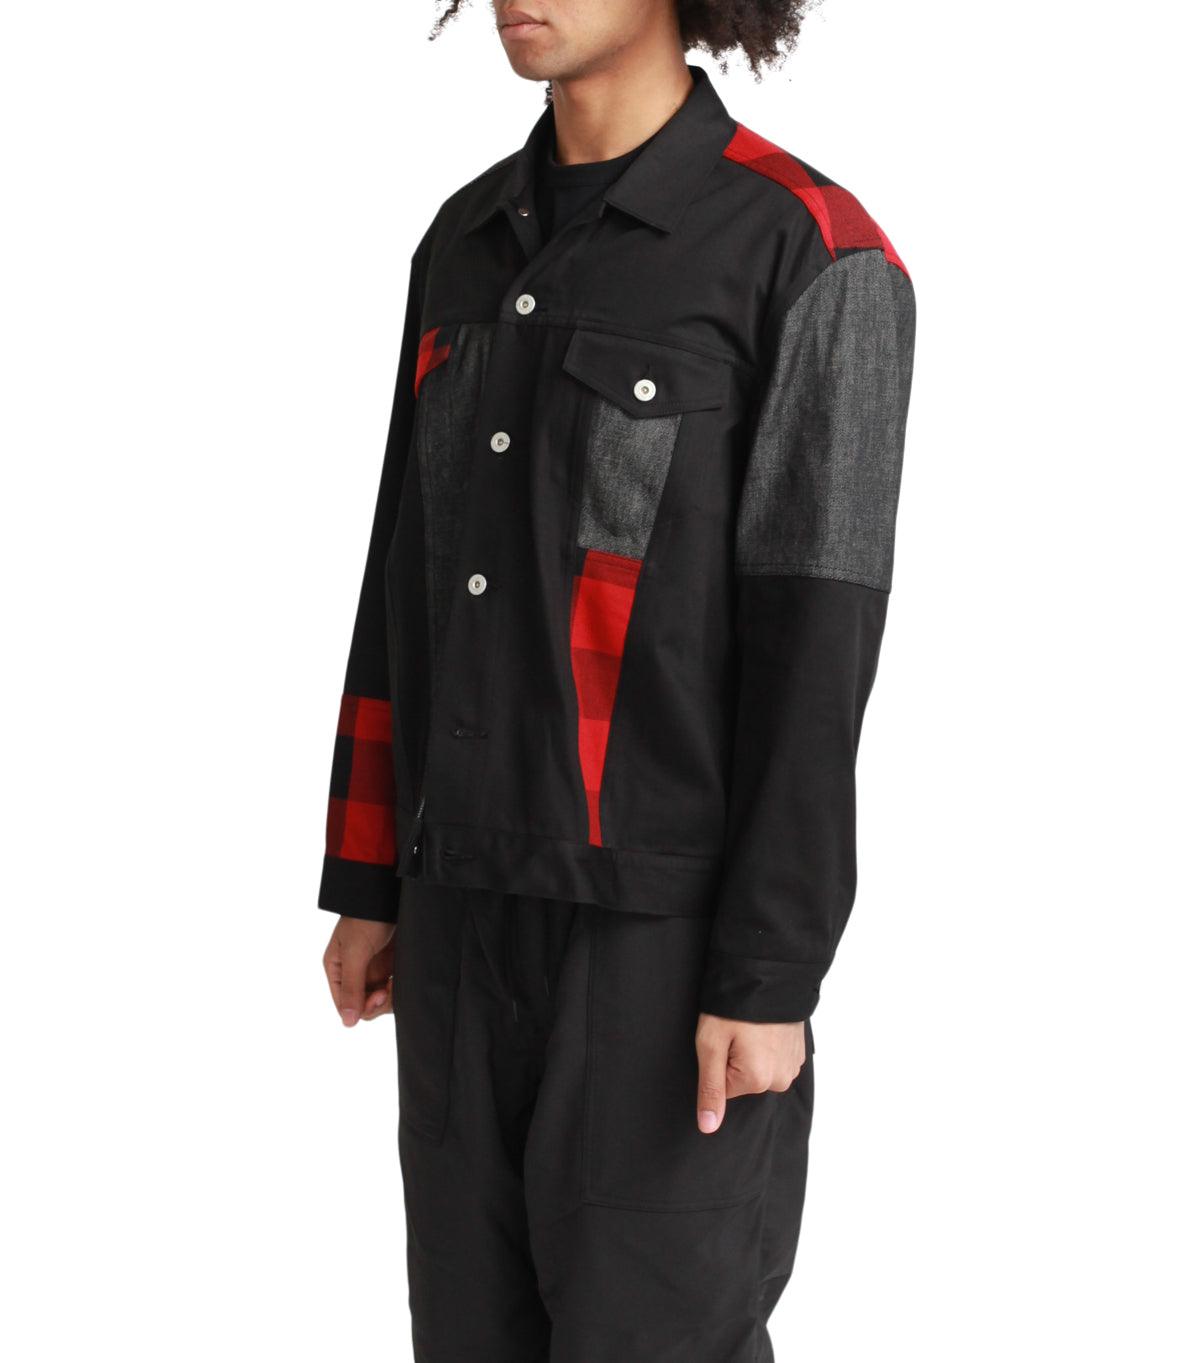 CdG Homme Multi Fabric Jacket Black Red | SOMEWHERE